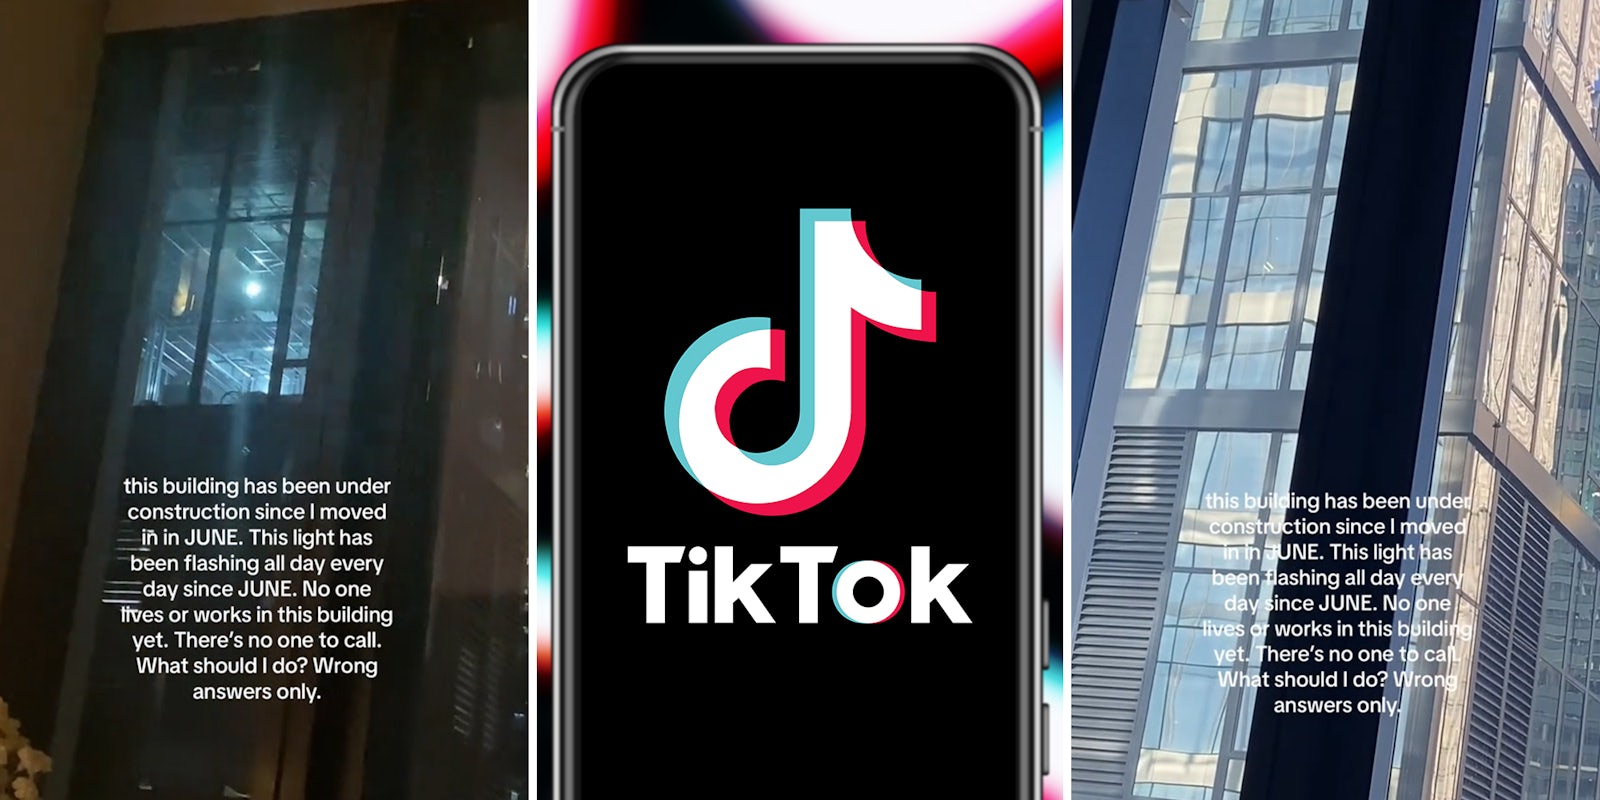 Woman blinded by neighboring flashing light at night for months asks TikTok for help